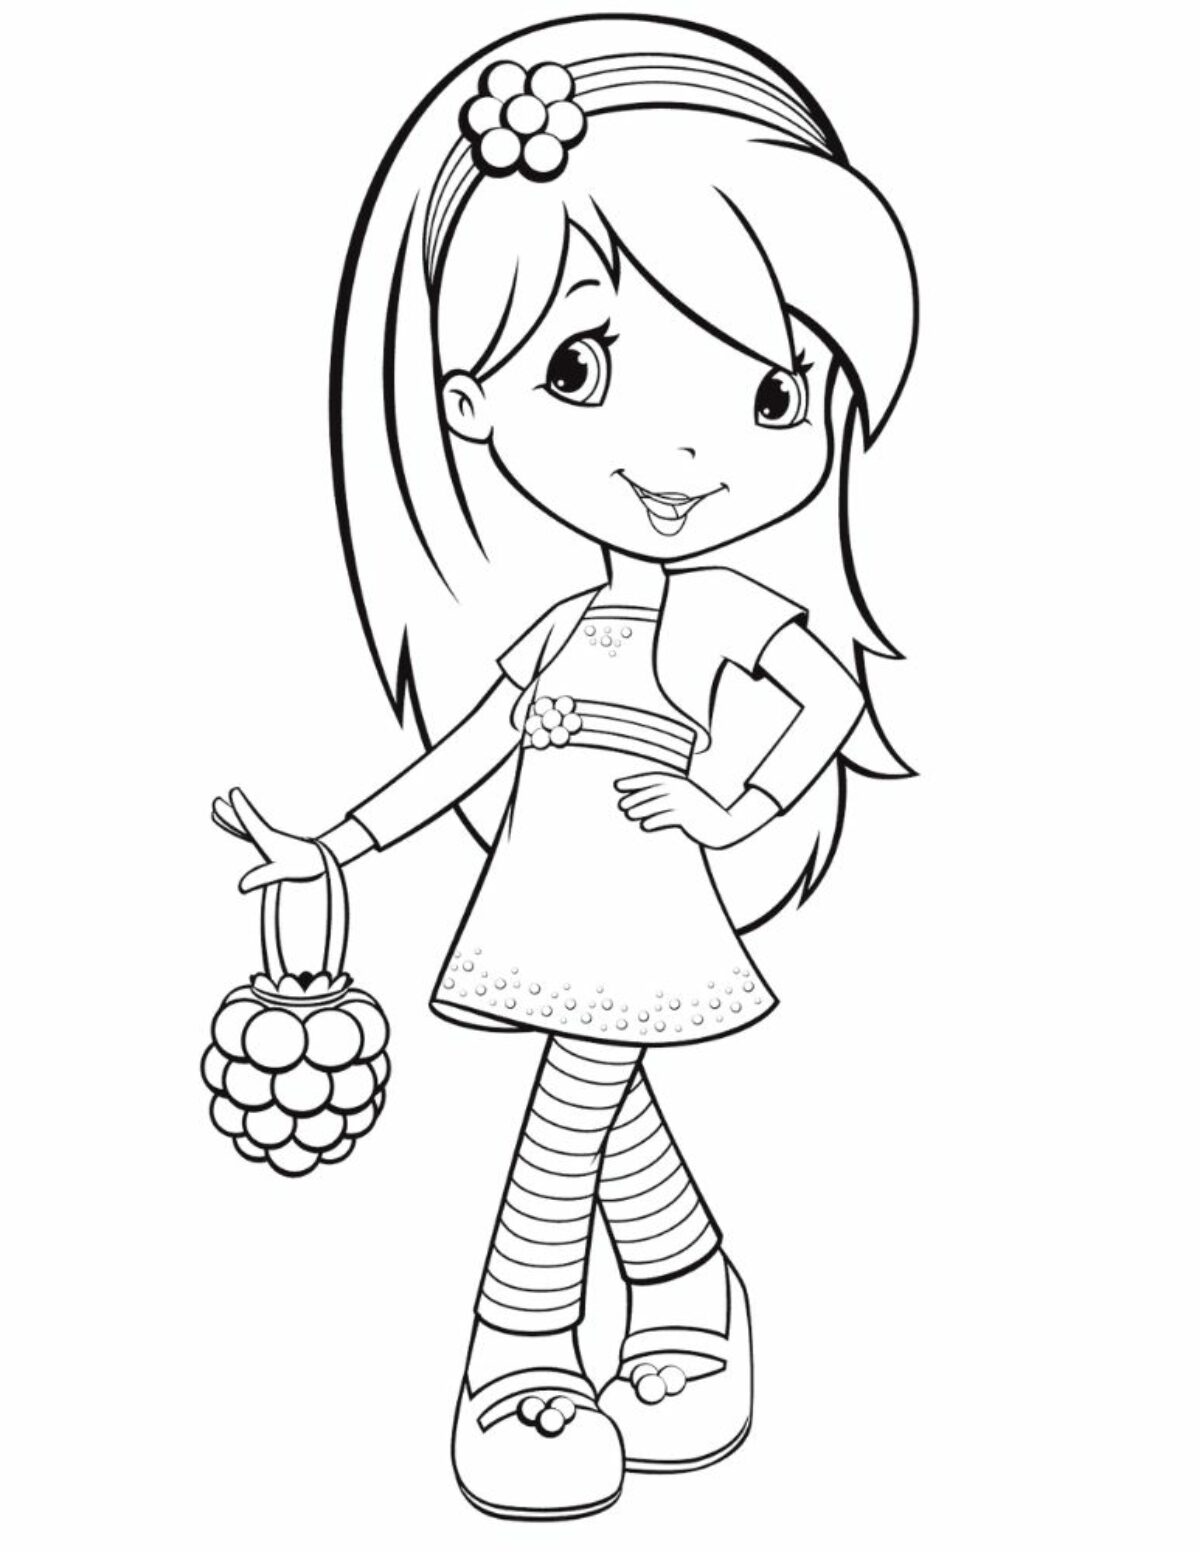 blueberry muffin coloring pages